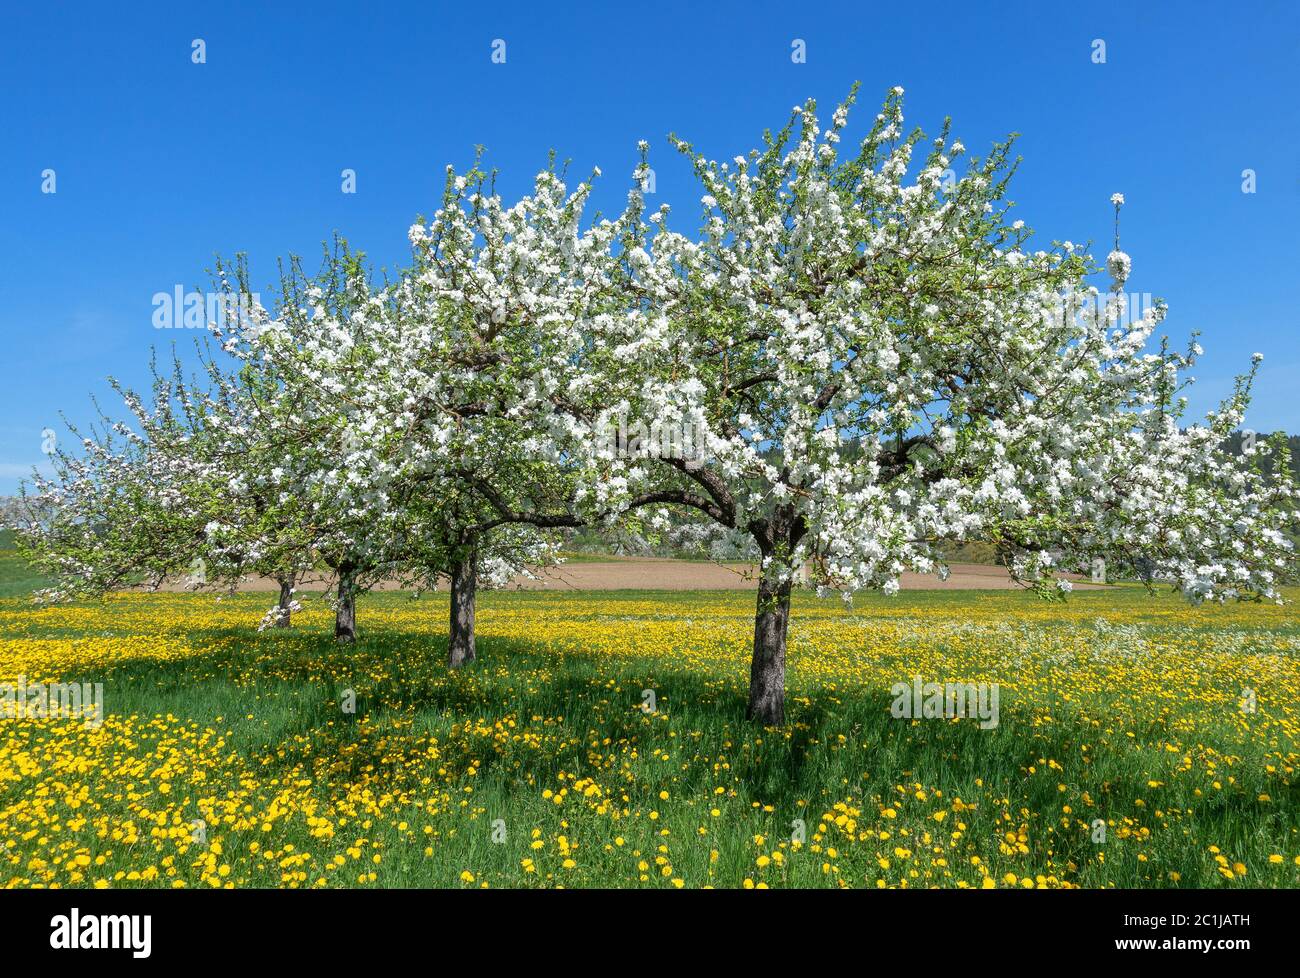 Four blooming apple trees diagonally in a row on a flower meadow with yellow dandelions in spring Stock Photo